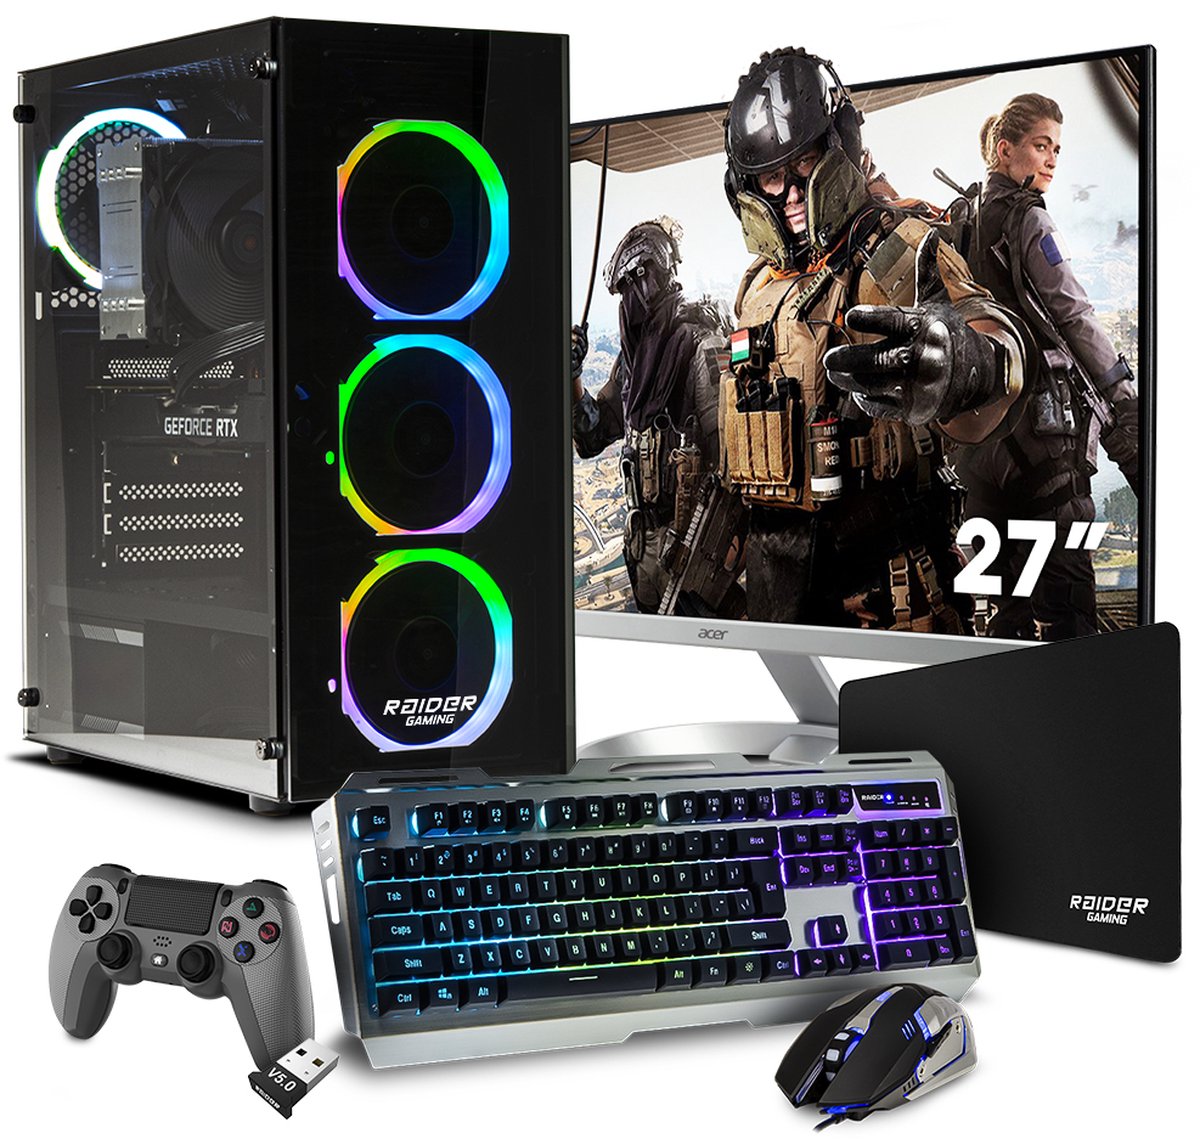 Complete set High-End Intel Game PC met 27 inch Gaming Monitor - incl. accessoires bundel en 27 RAIDER Gaming monitor - 16GB - NVIDIA RTX 3060Ti 8GB - 1000GB SSD - Windows 11